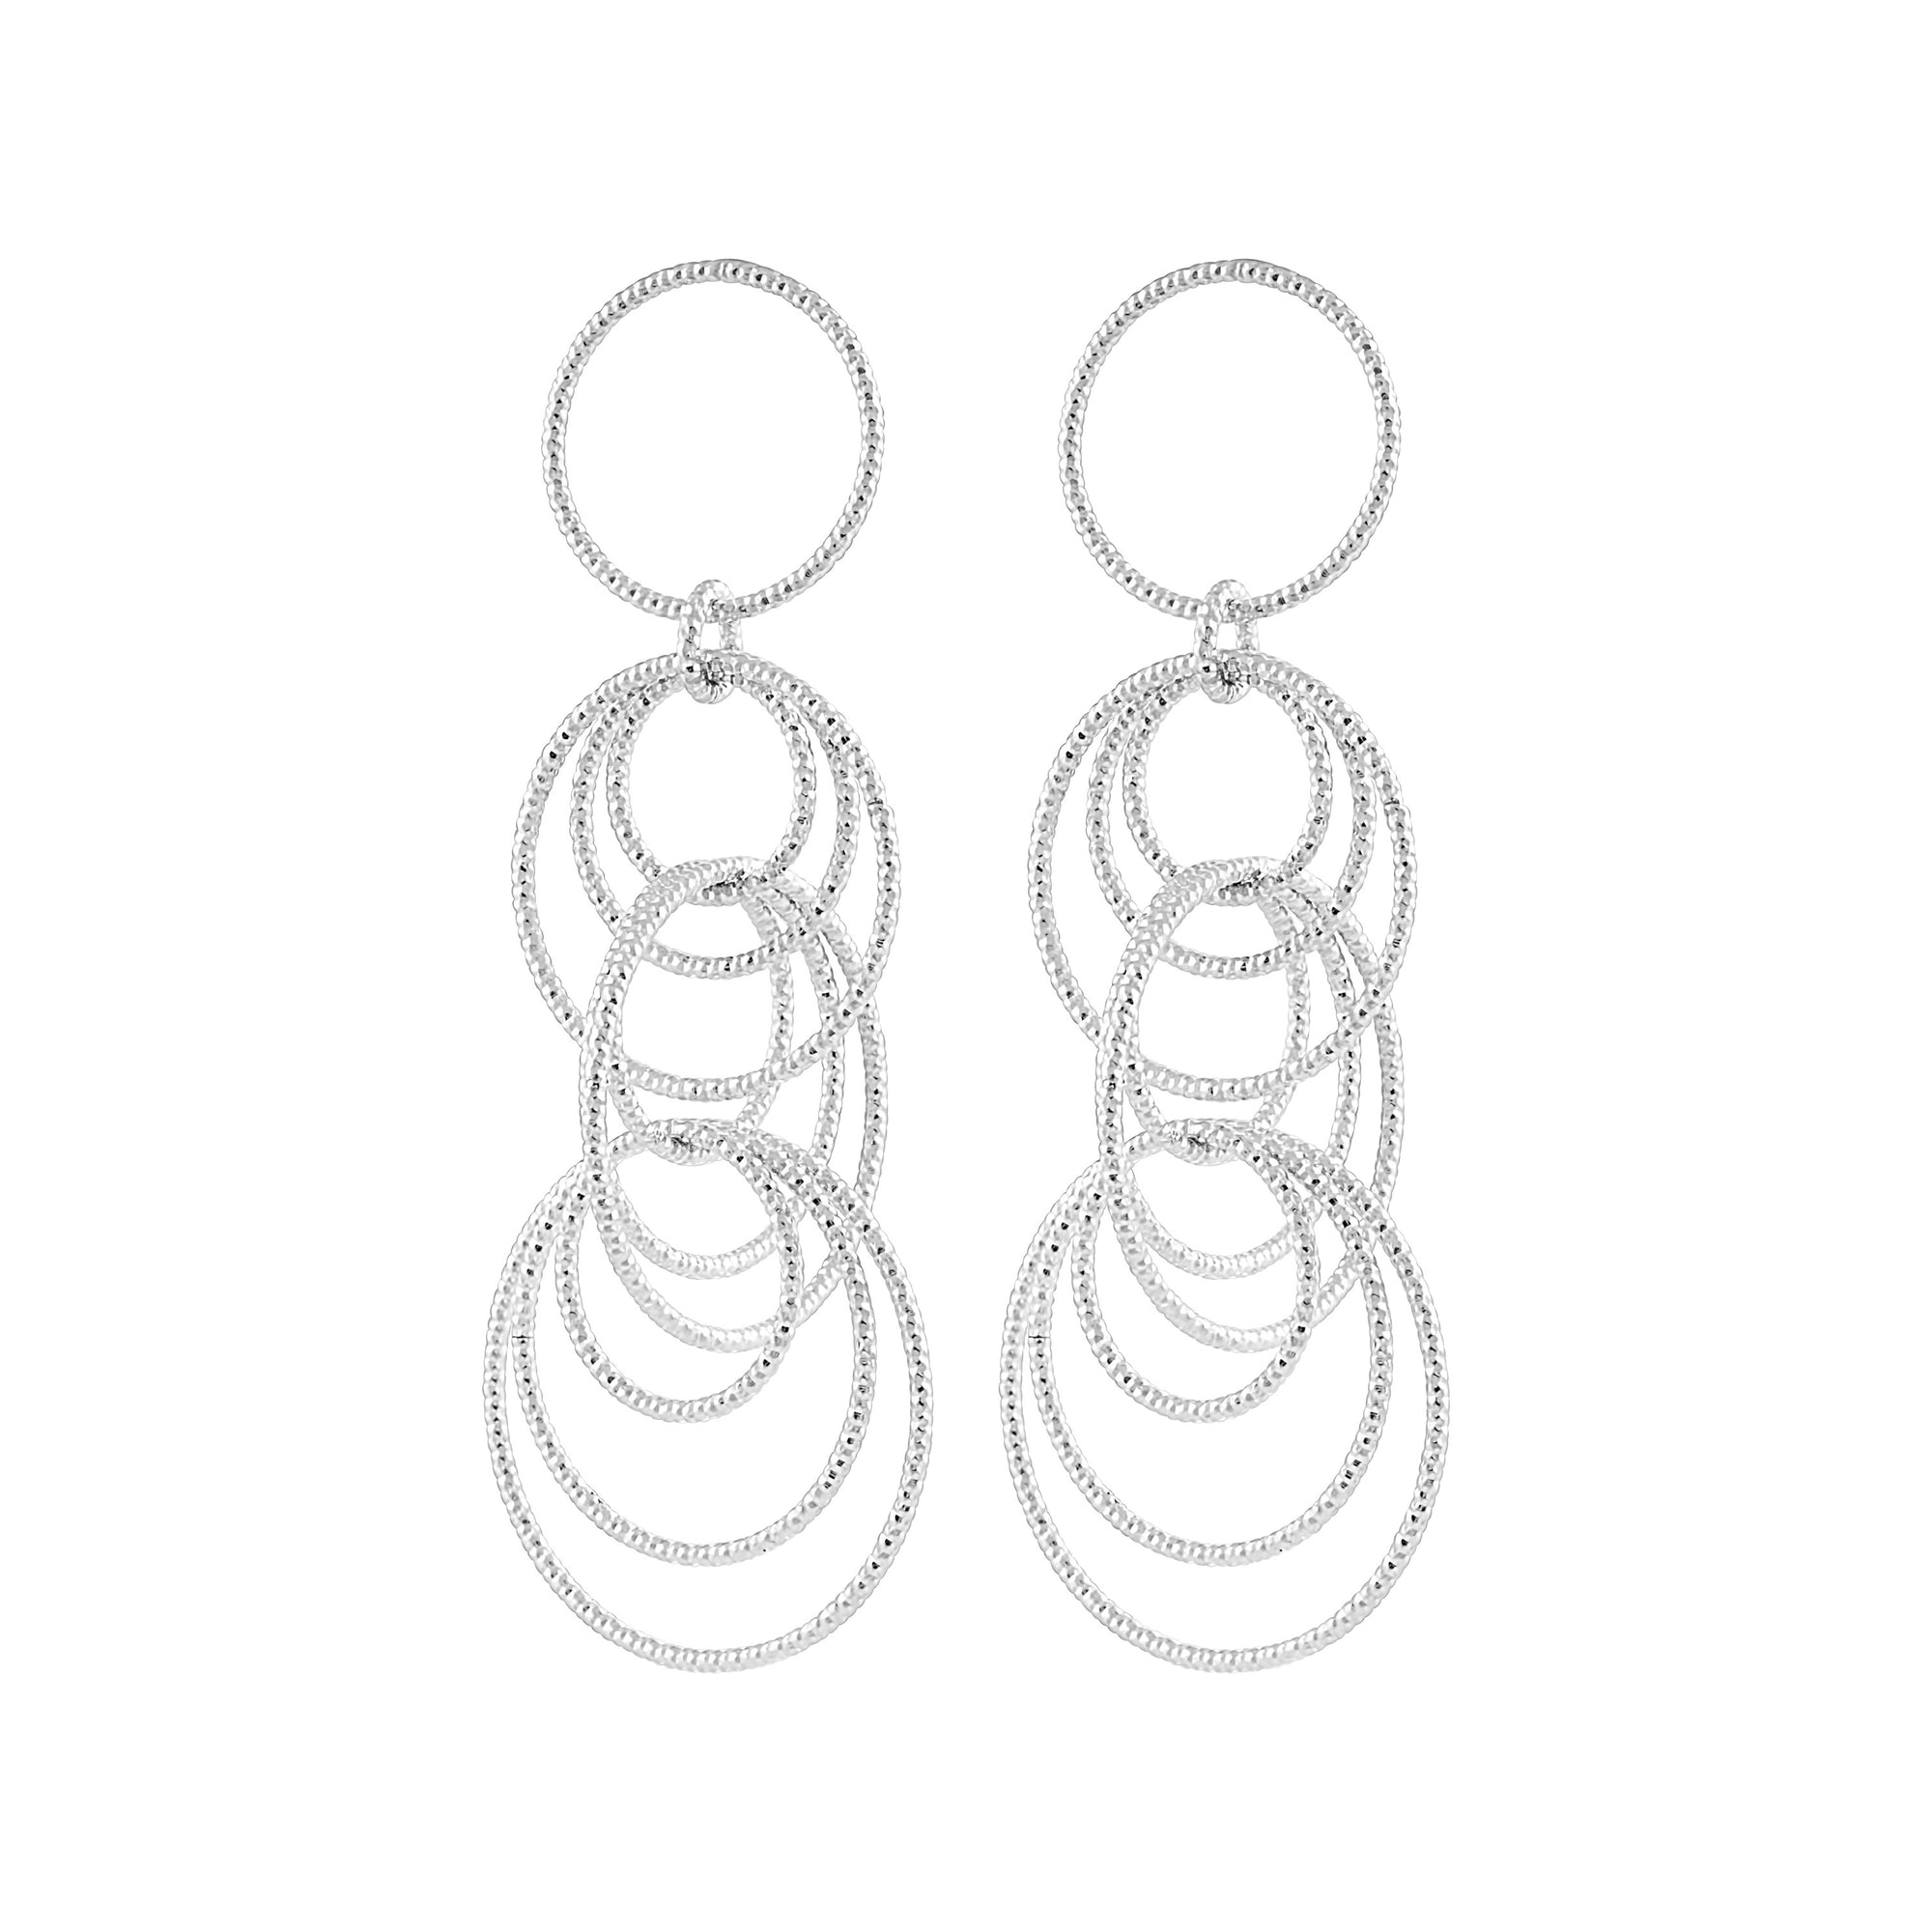 IDALIA Jewelry Circle Drop Earrings Sterling Silver .925 Made in Italy Italian Jewelry Ethically Made Drop Earrings 